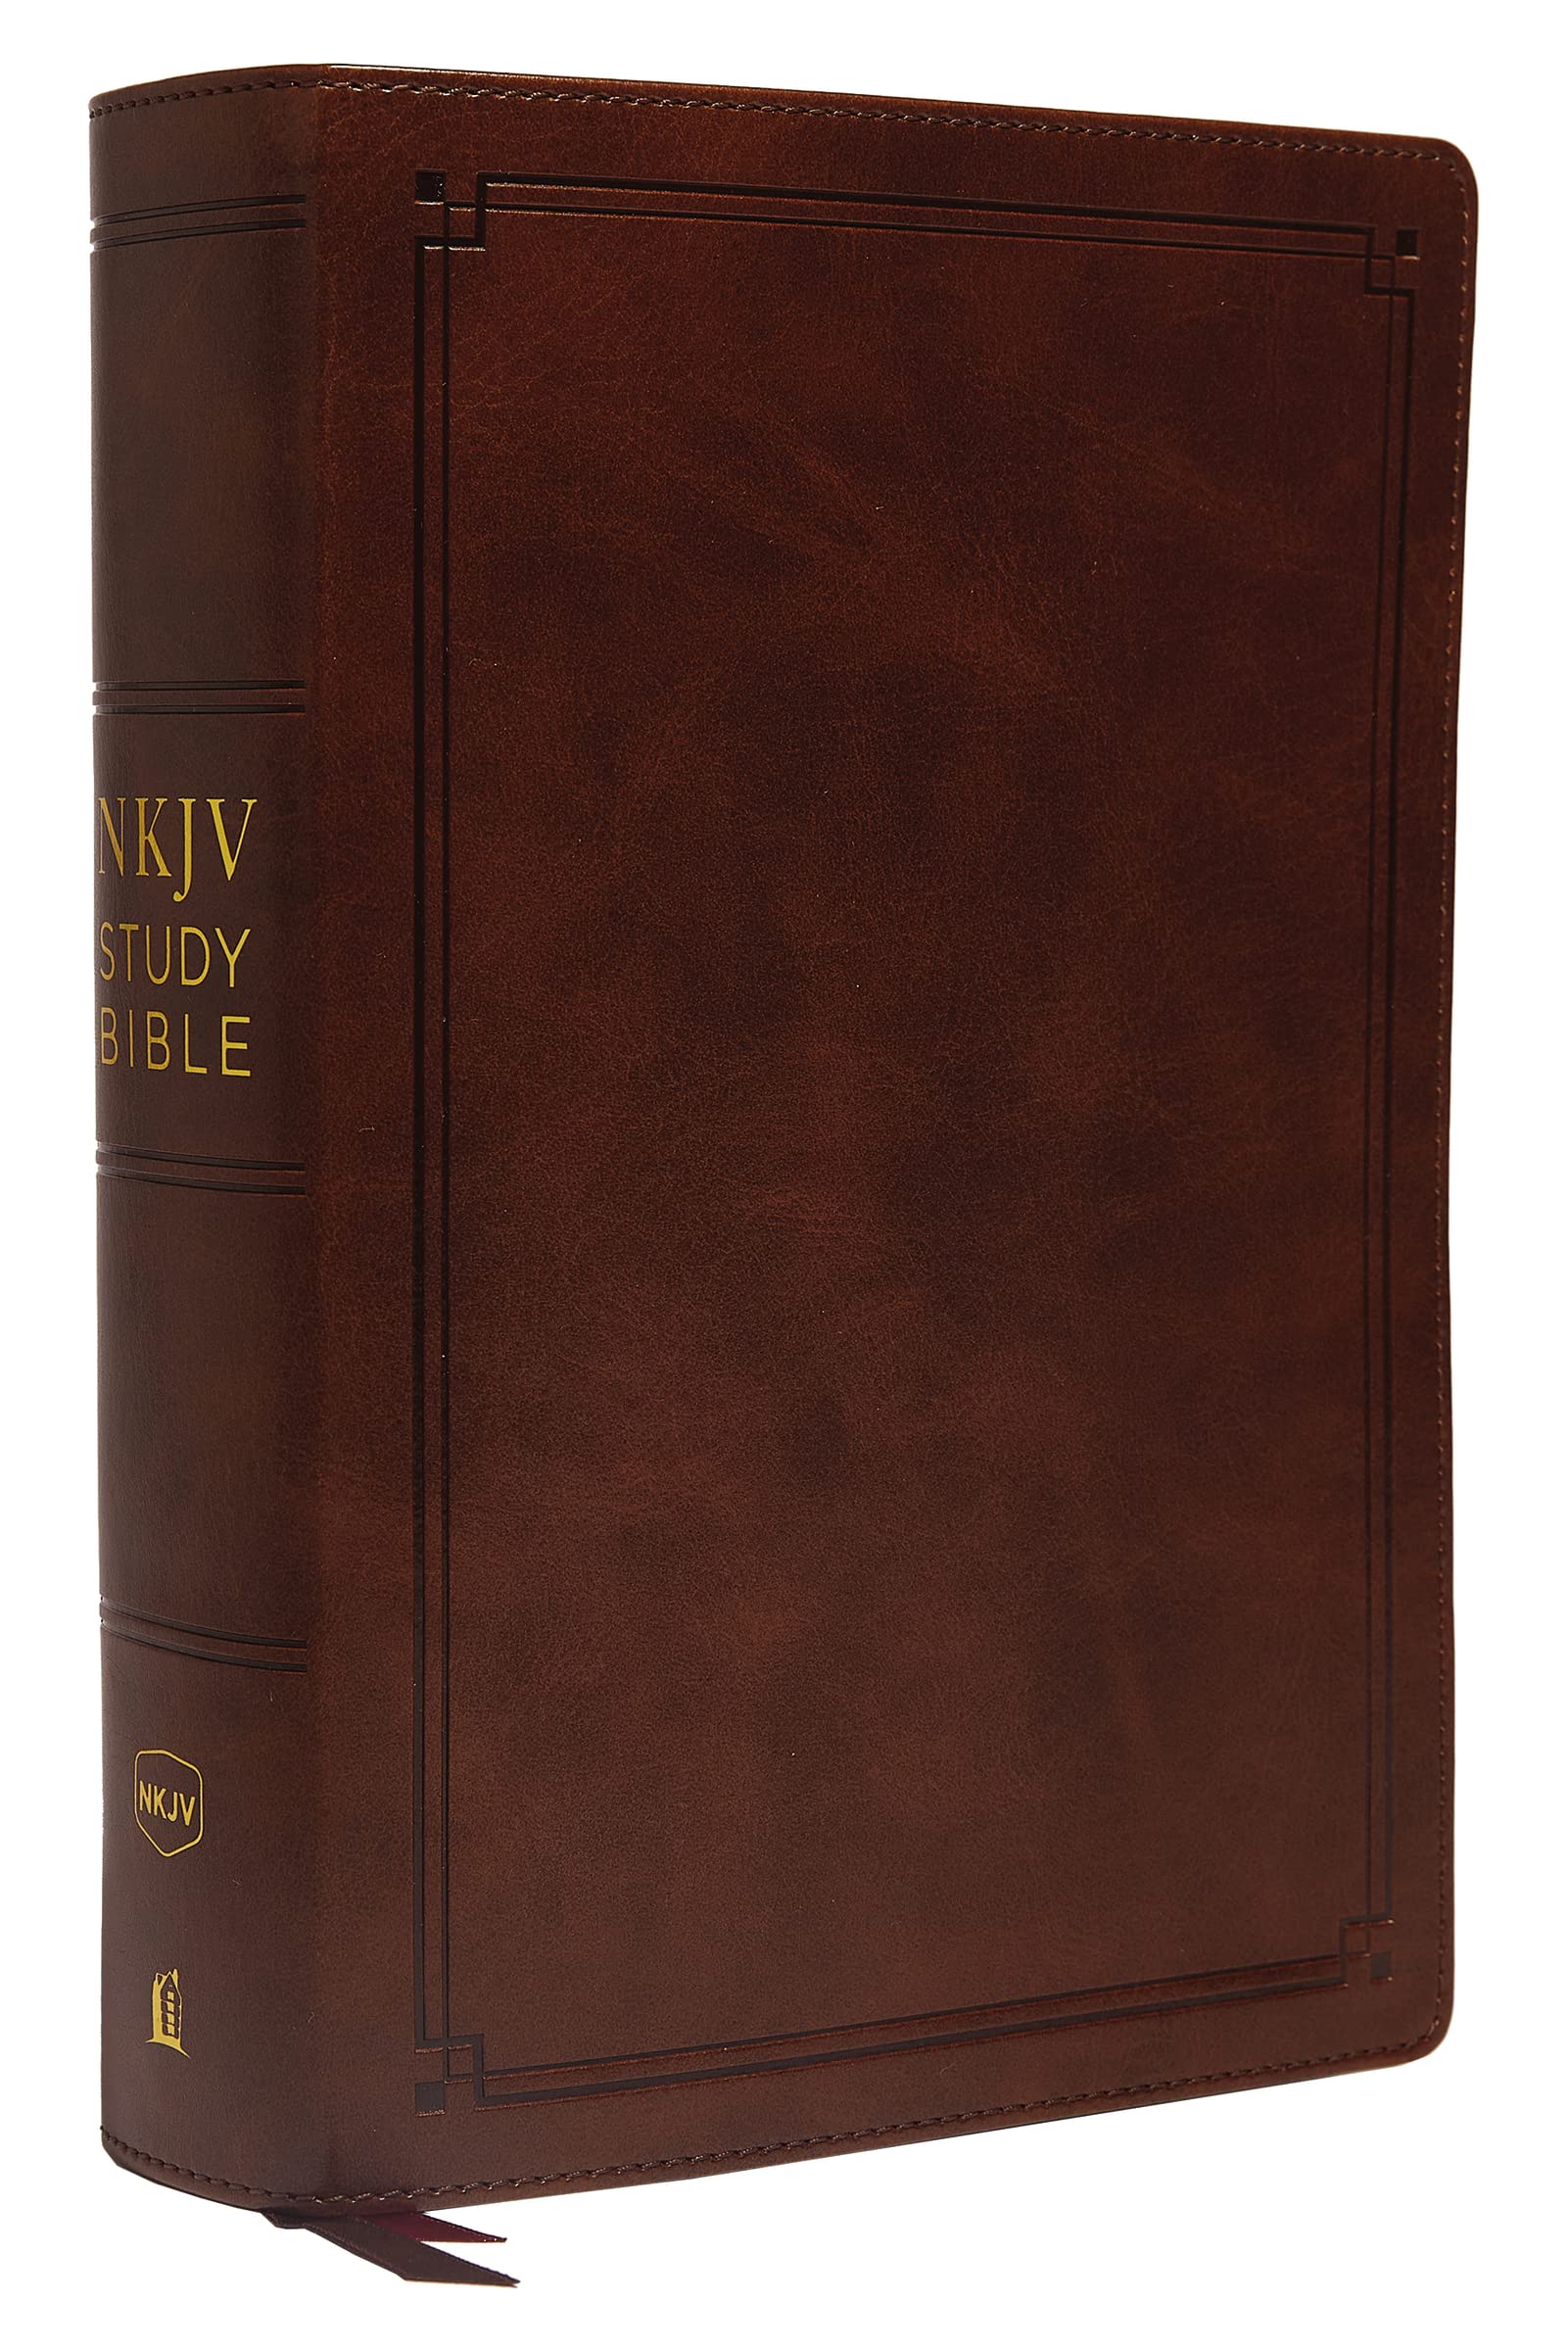 NKJV Study Bible, Leathersoft, Brown, Comfort Print: The Complete Resource for Studying God’s Word